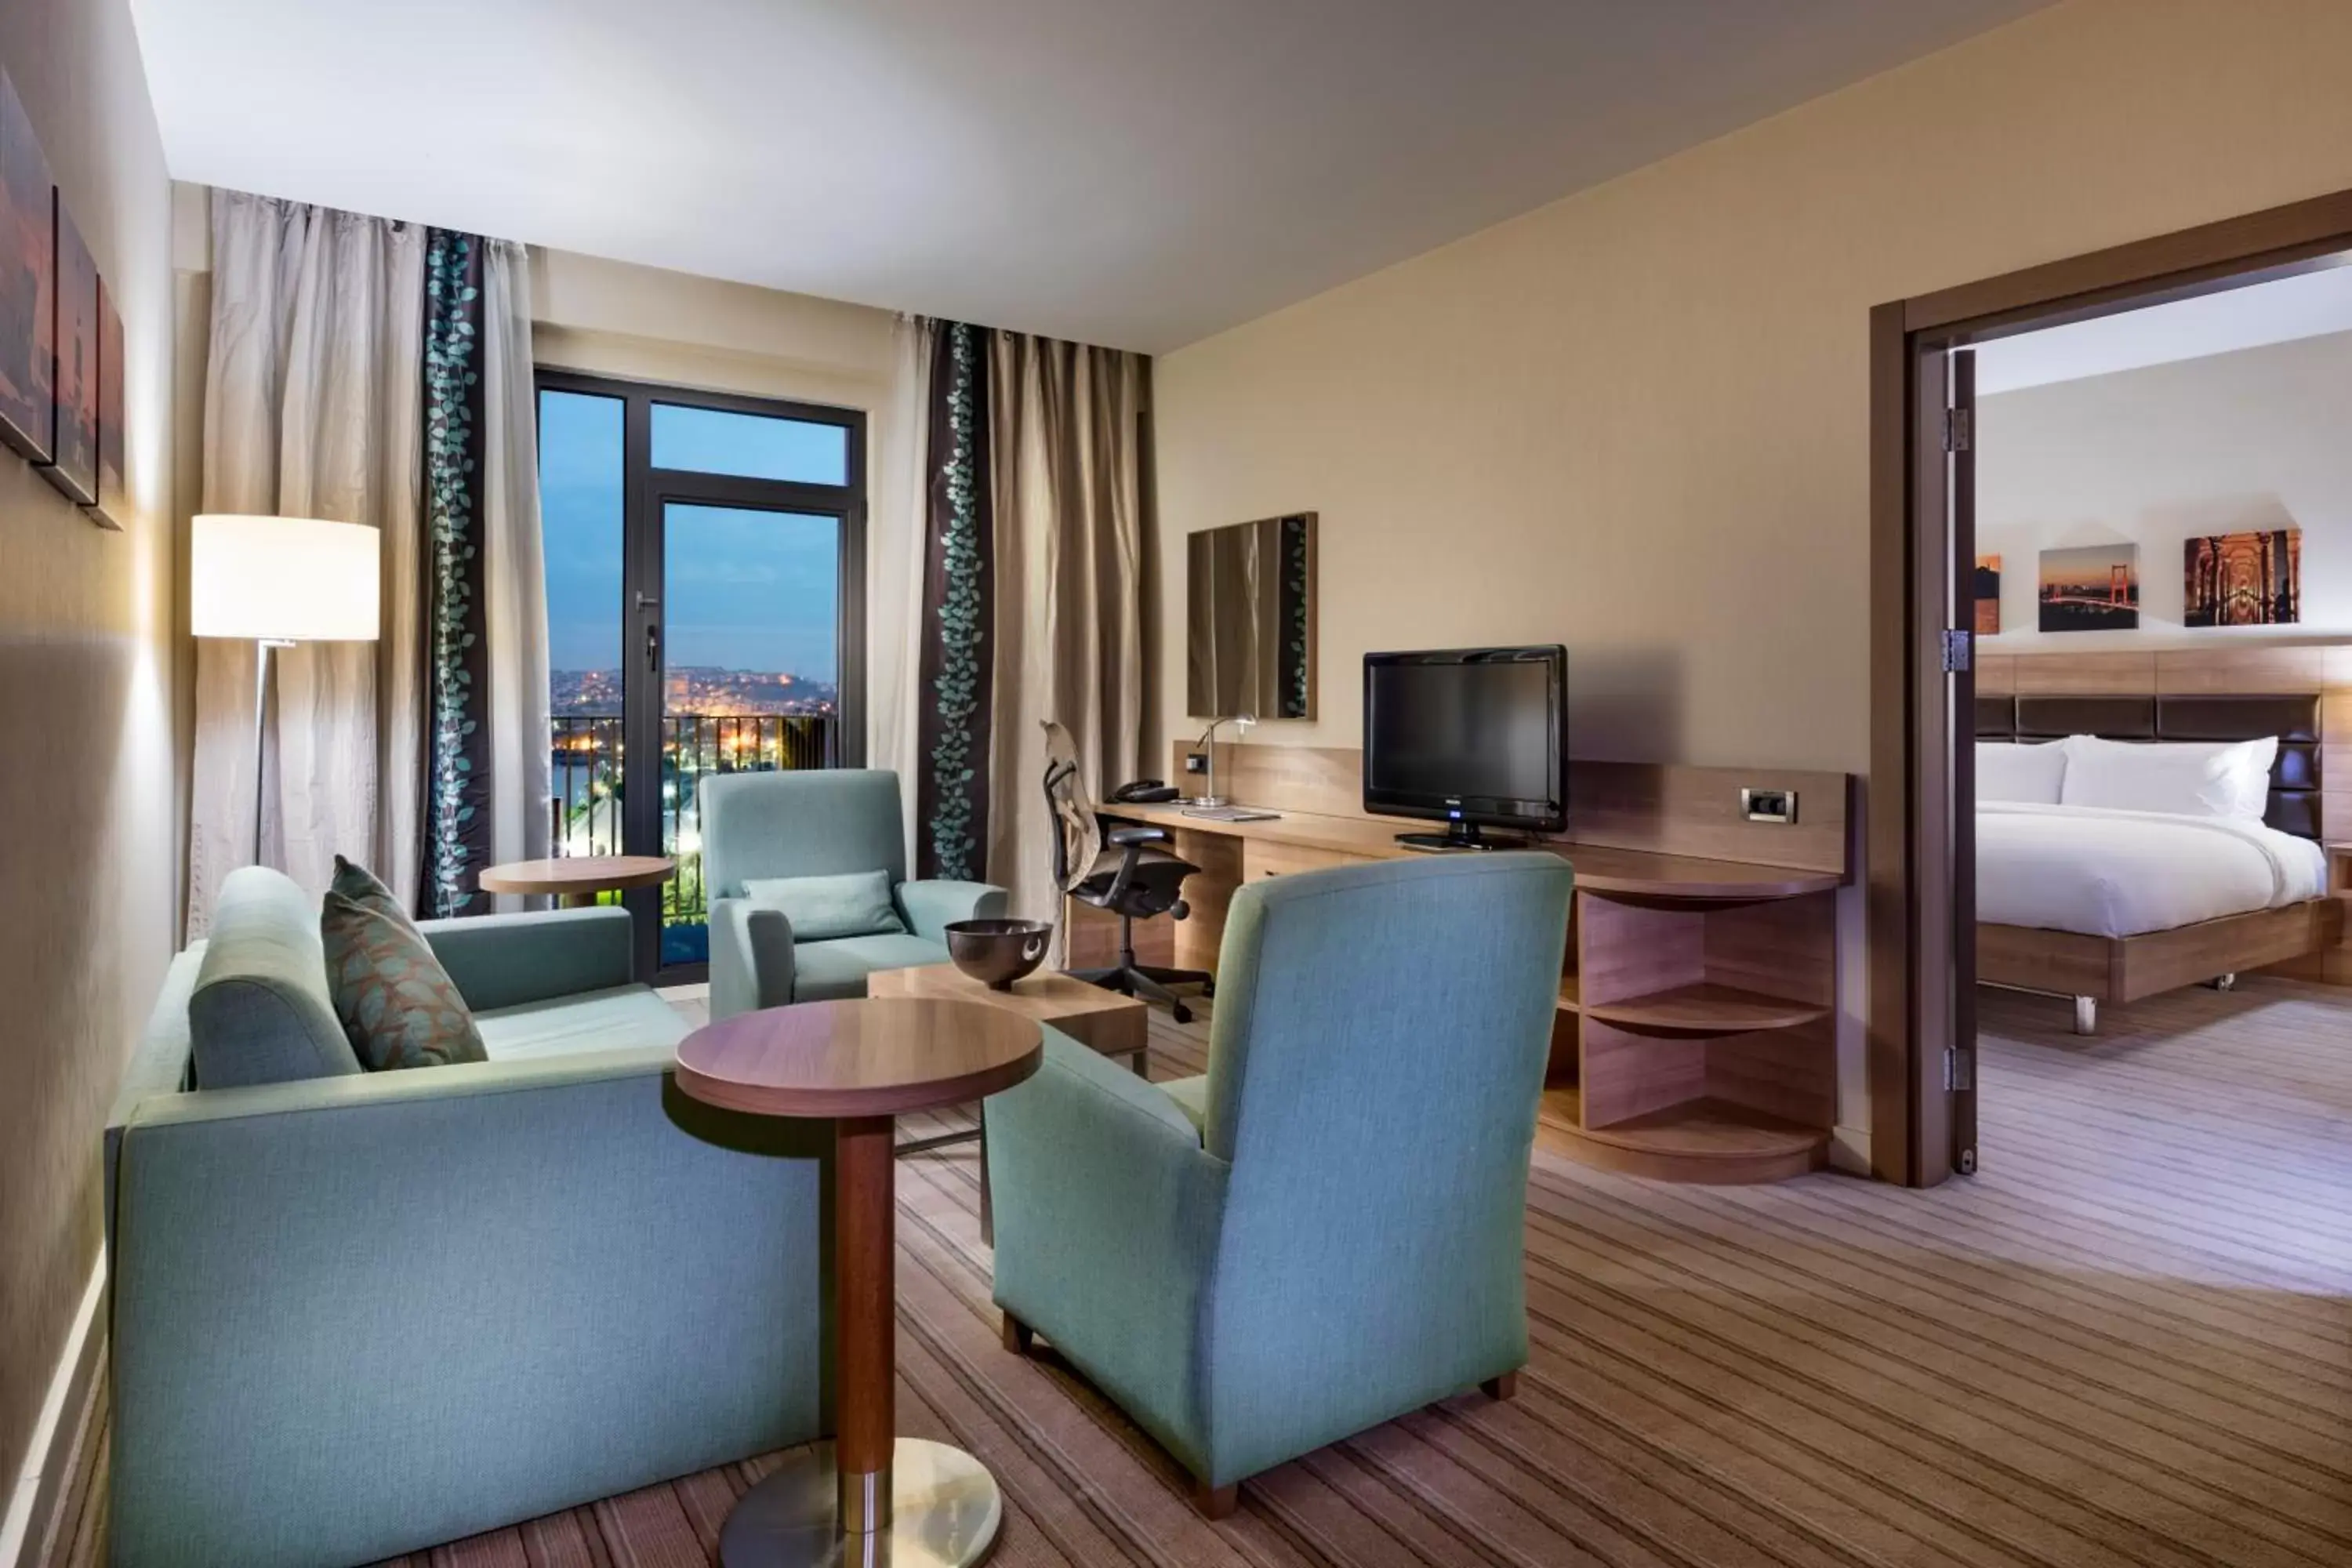 King Suite with Sea View in Dosso Dossi Hotels Golden Horn